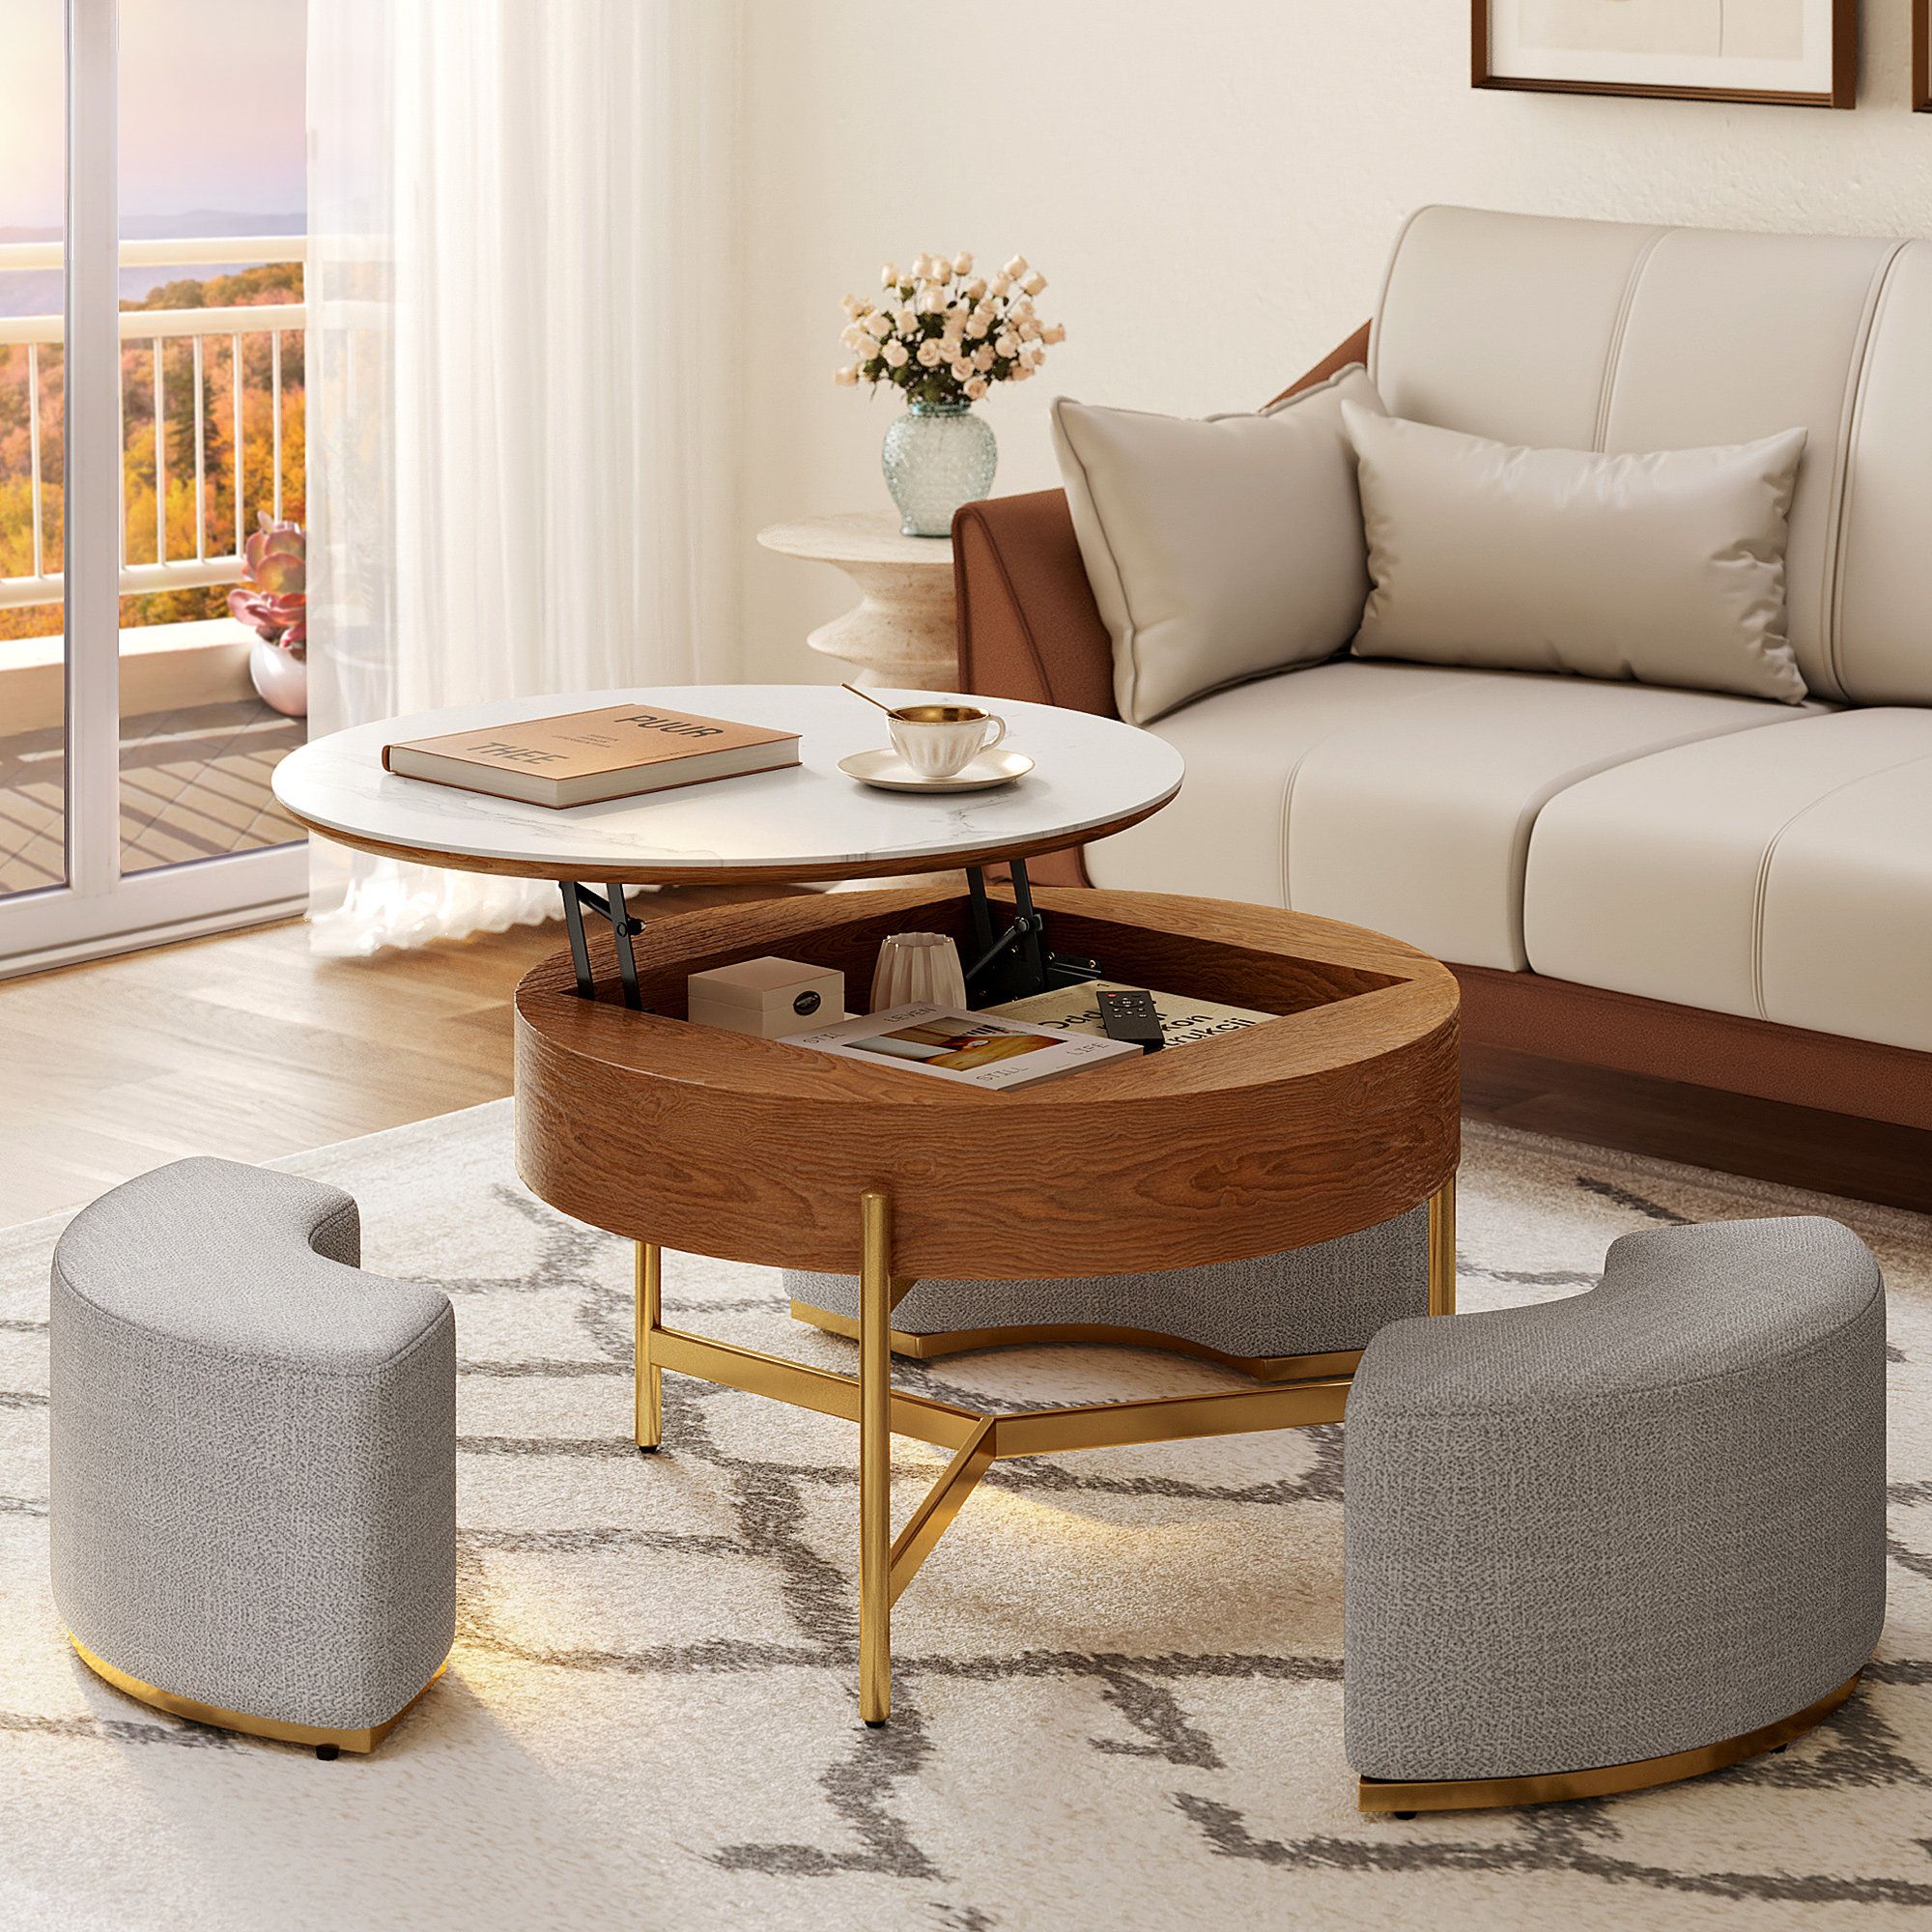 Everly Quinn Sohad Lift Top Extendable Frame Coffee Table With Storage &  Reviews | Wayfair For Lift Top Coffee Tables With Shelves (View 4 of 15)